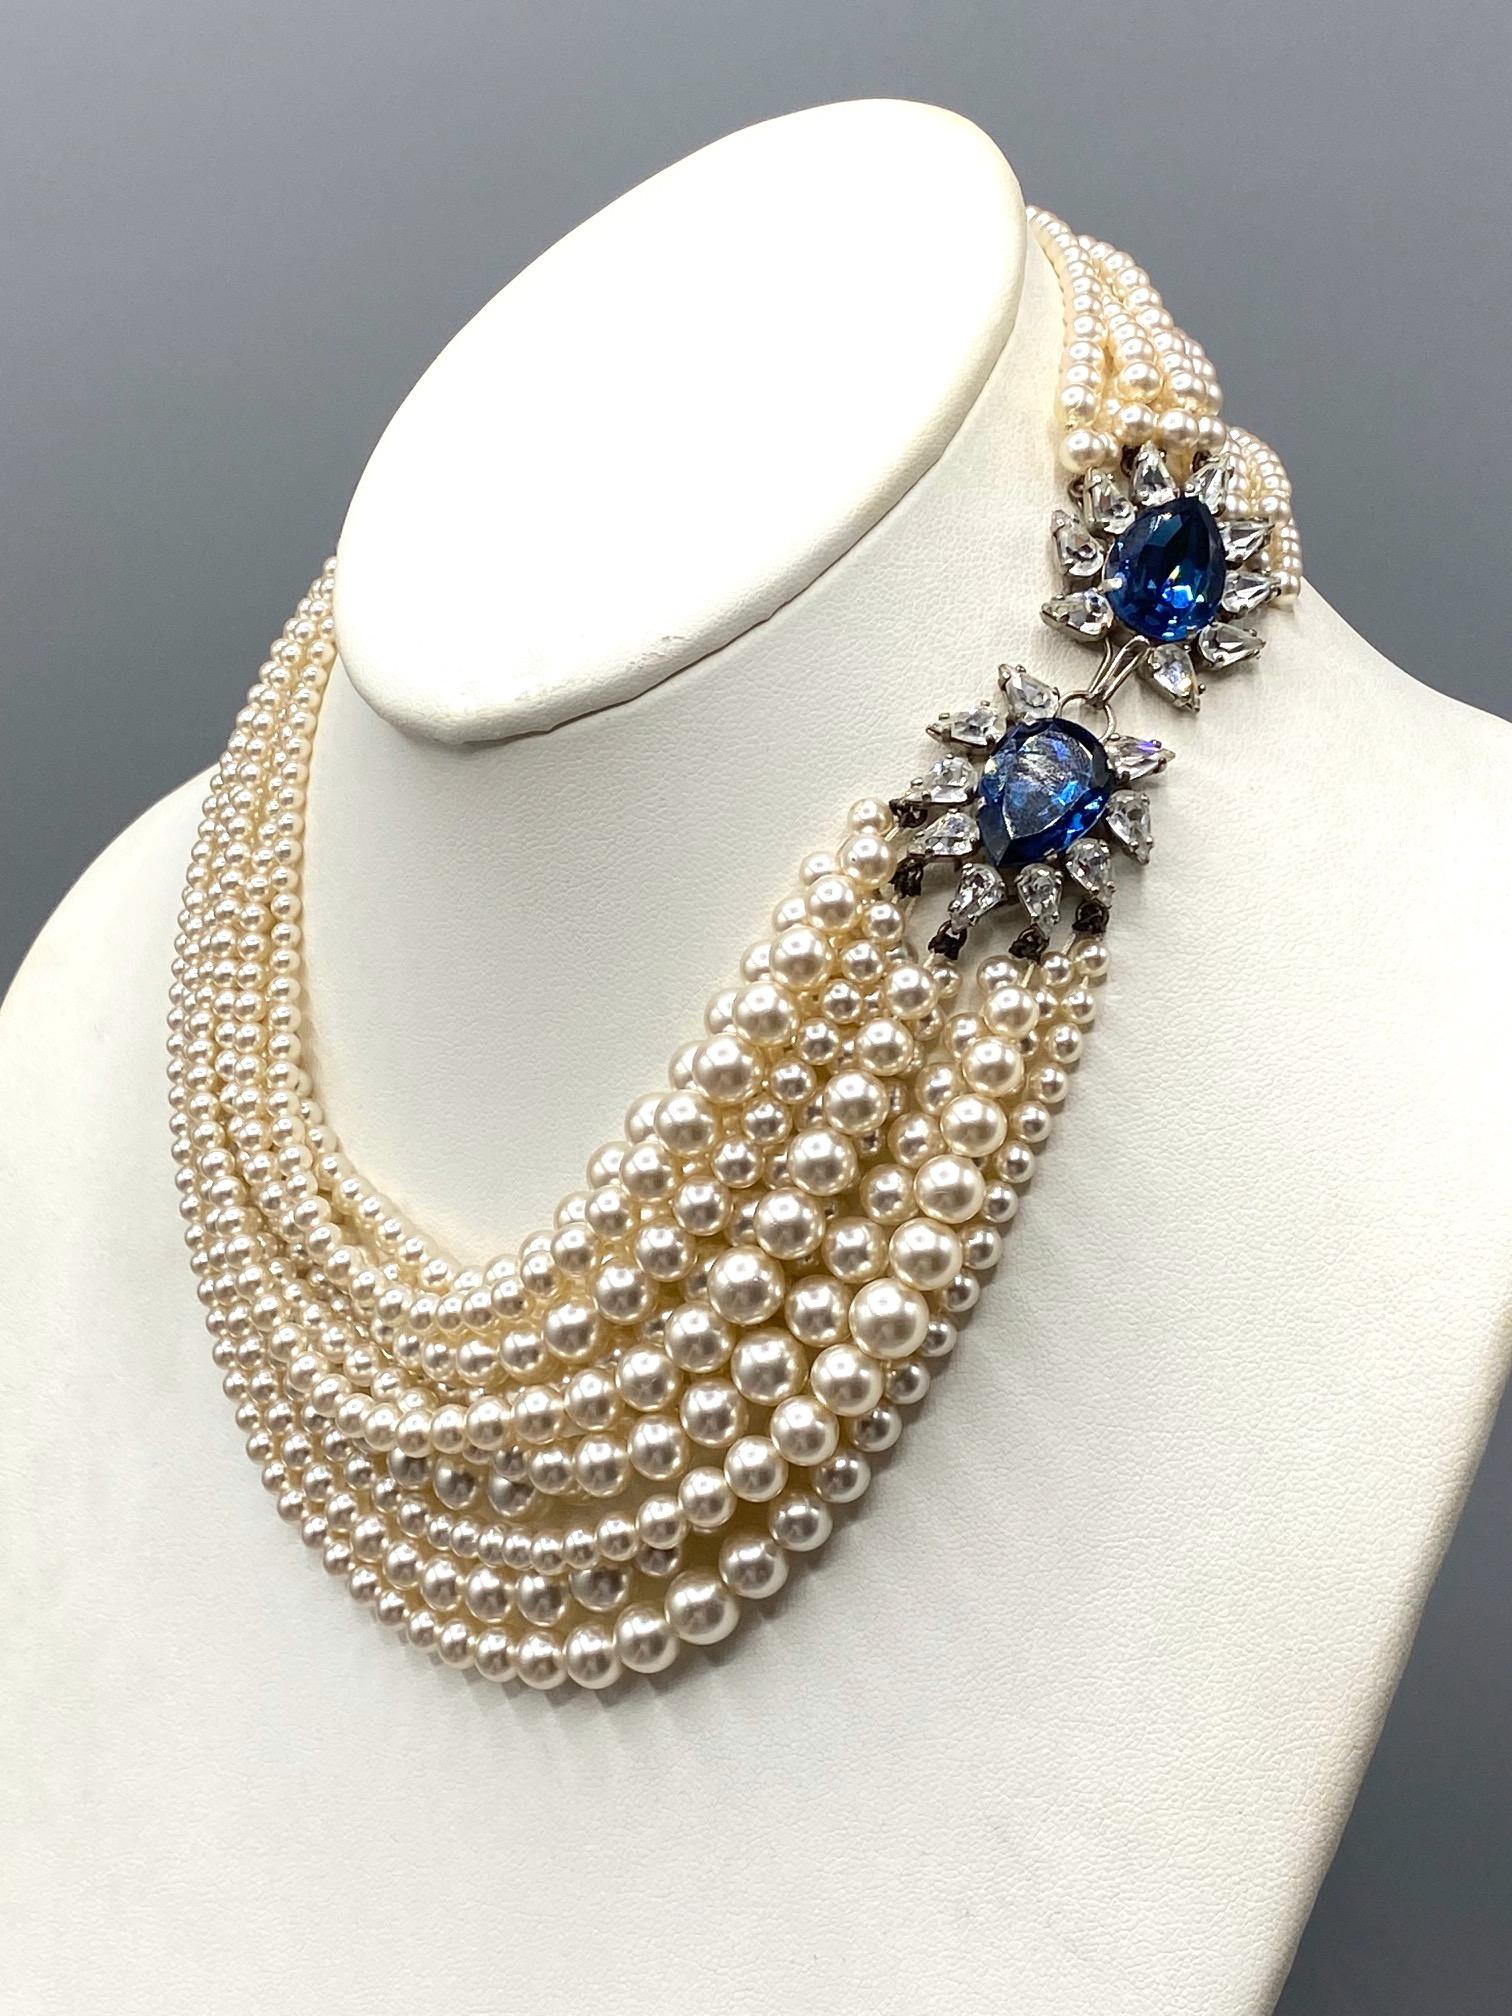 A beautiful French made faux pearl necklace with rhinestone clasp attributed to Louis Rousselet. The necklace has beautiful designs of 11 strands of graduated glass bead faux pearls with a striking rhinestone hook and eye clasp. Each side of the